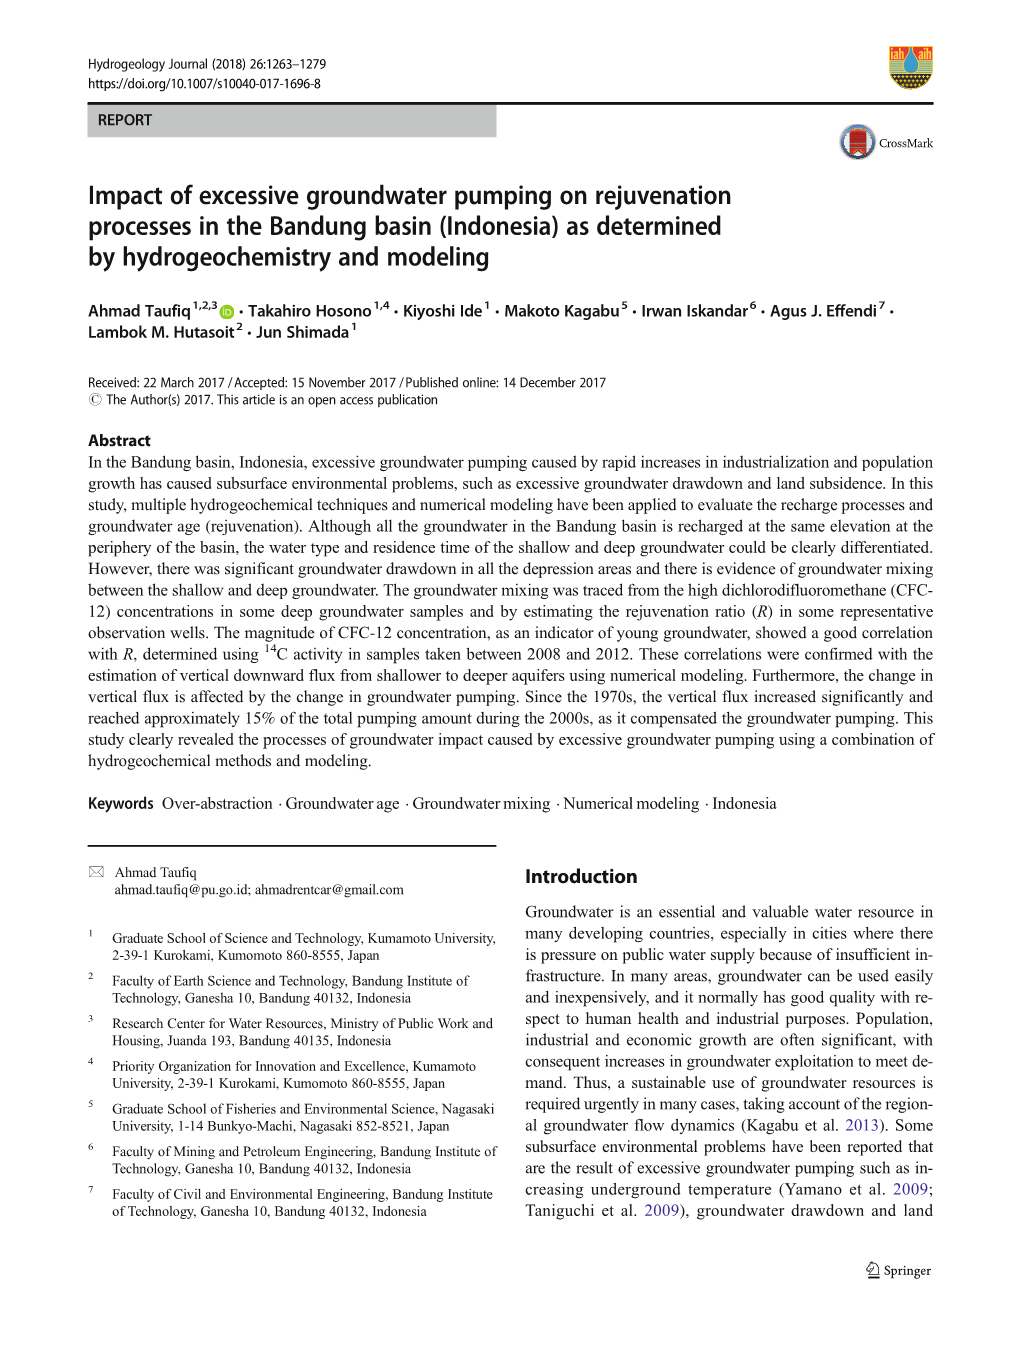 Impact of Excessive Groundwater Pumping on Rejuvenation Processes in the Bandung Basin (Indonesia) As Determined by Hydrogeochemistry and Modeling